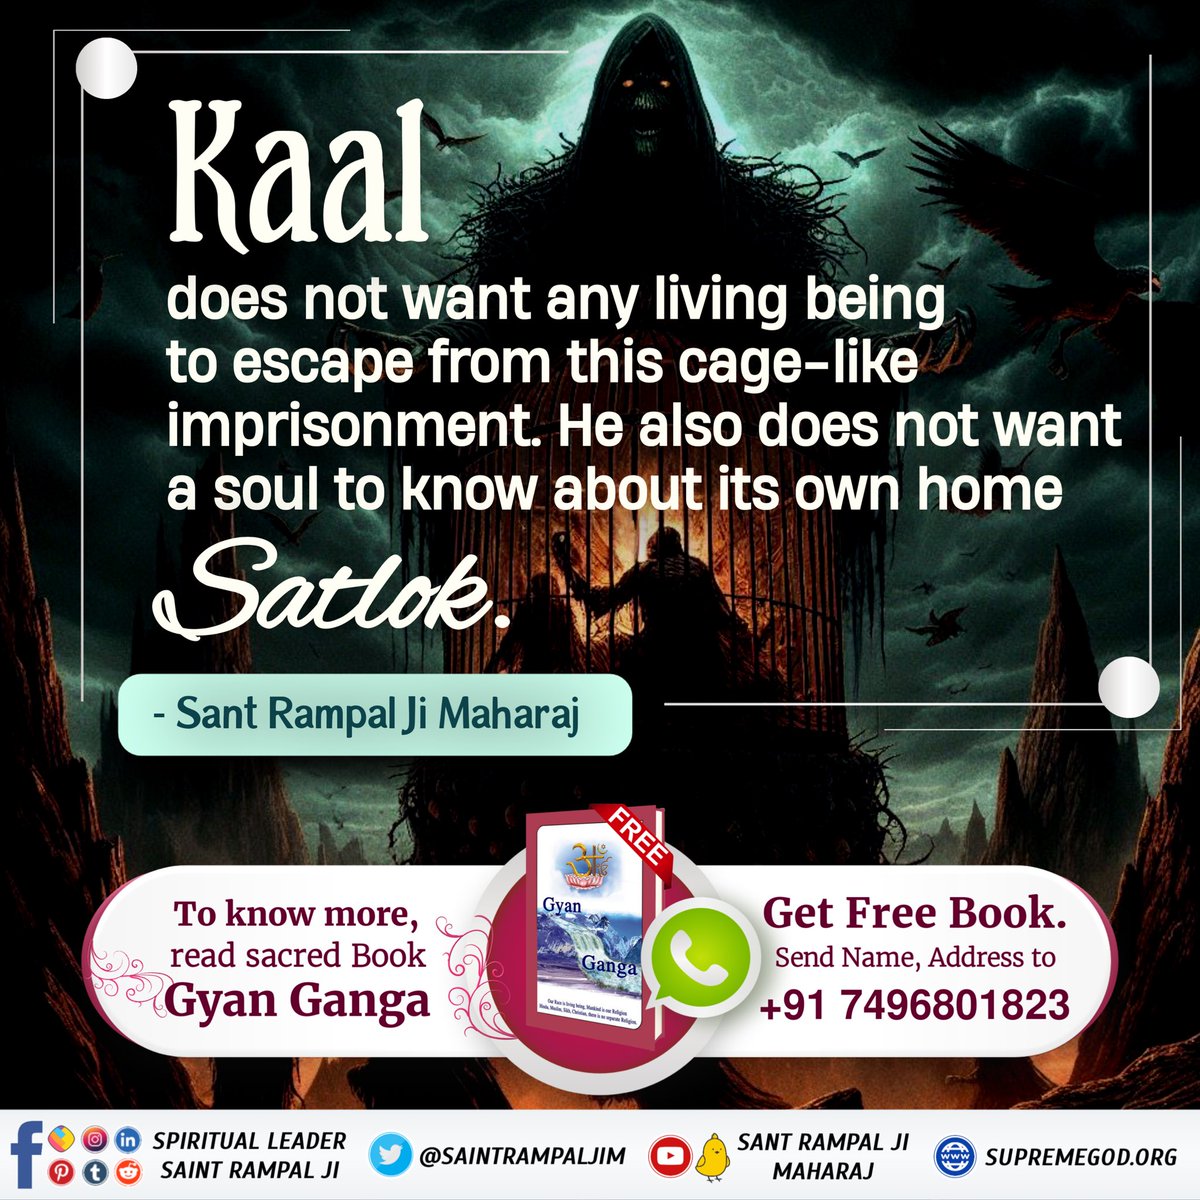 Kaal does not want any living being to escape from this cage-like imprisonment. He also does not want a soul to know about its own home Satlok. #SantRampalJiMaharaj #GyanGanga